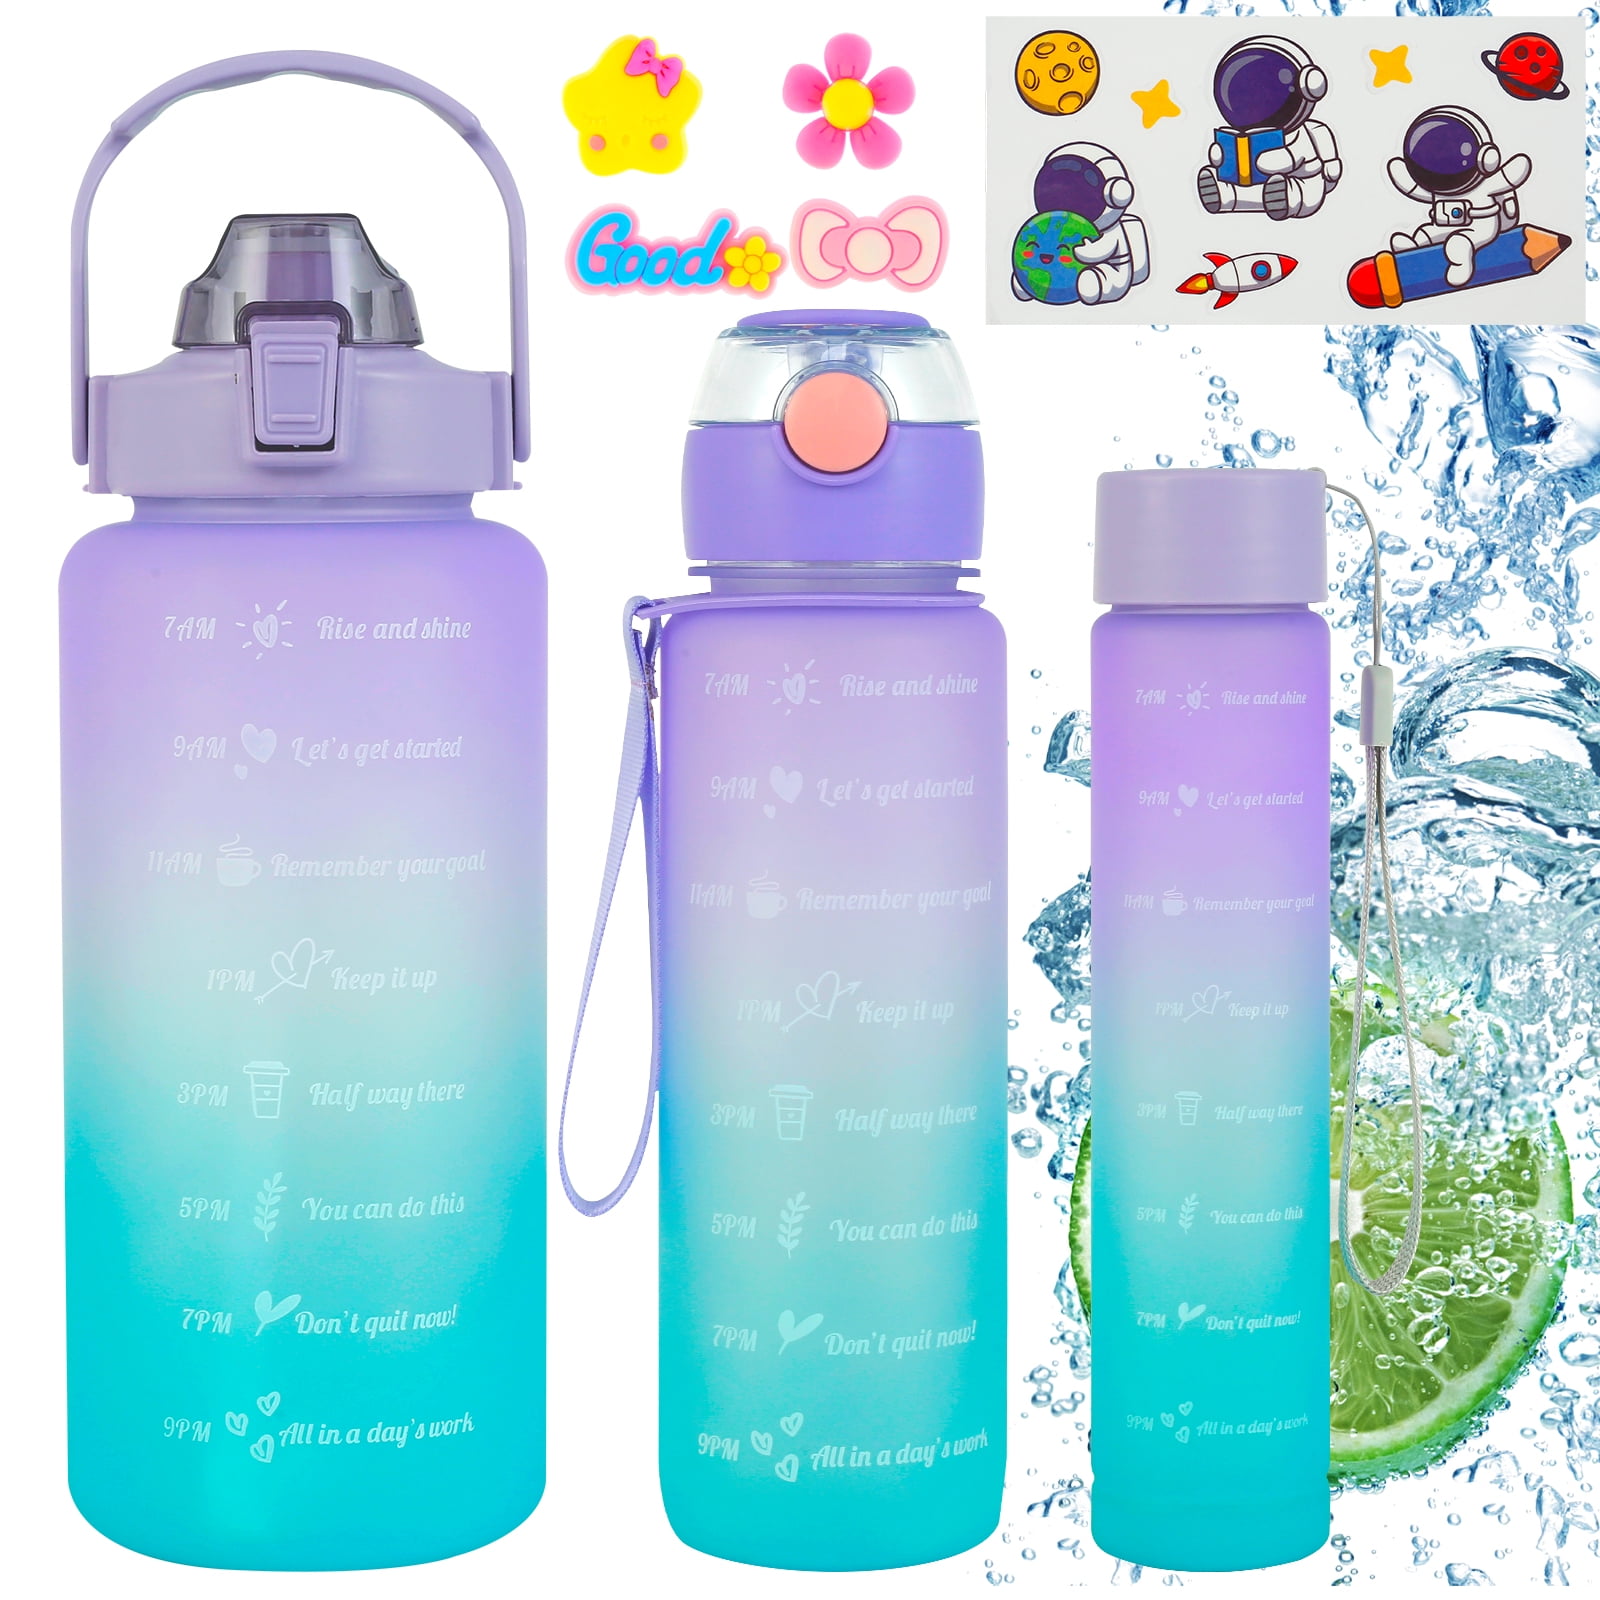 New 3 Pack Water Bottles with 2L Large Bottle 800MLPortable Bottle and  300ML Mini Bottle Motivational Drinks Bottle with Time